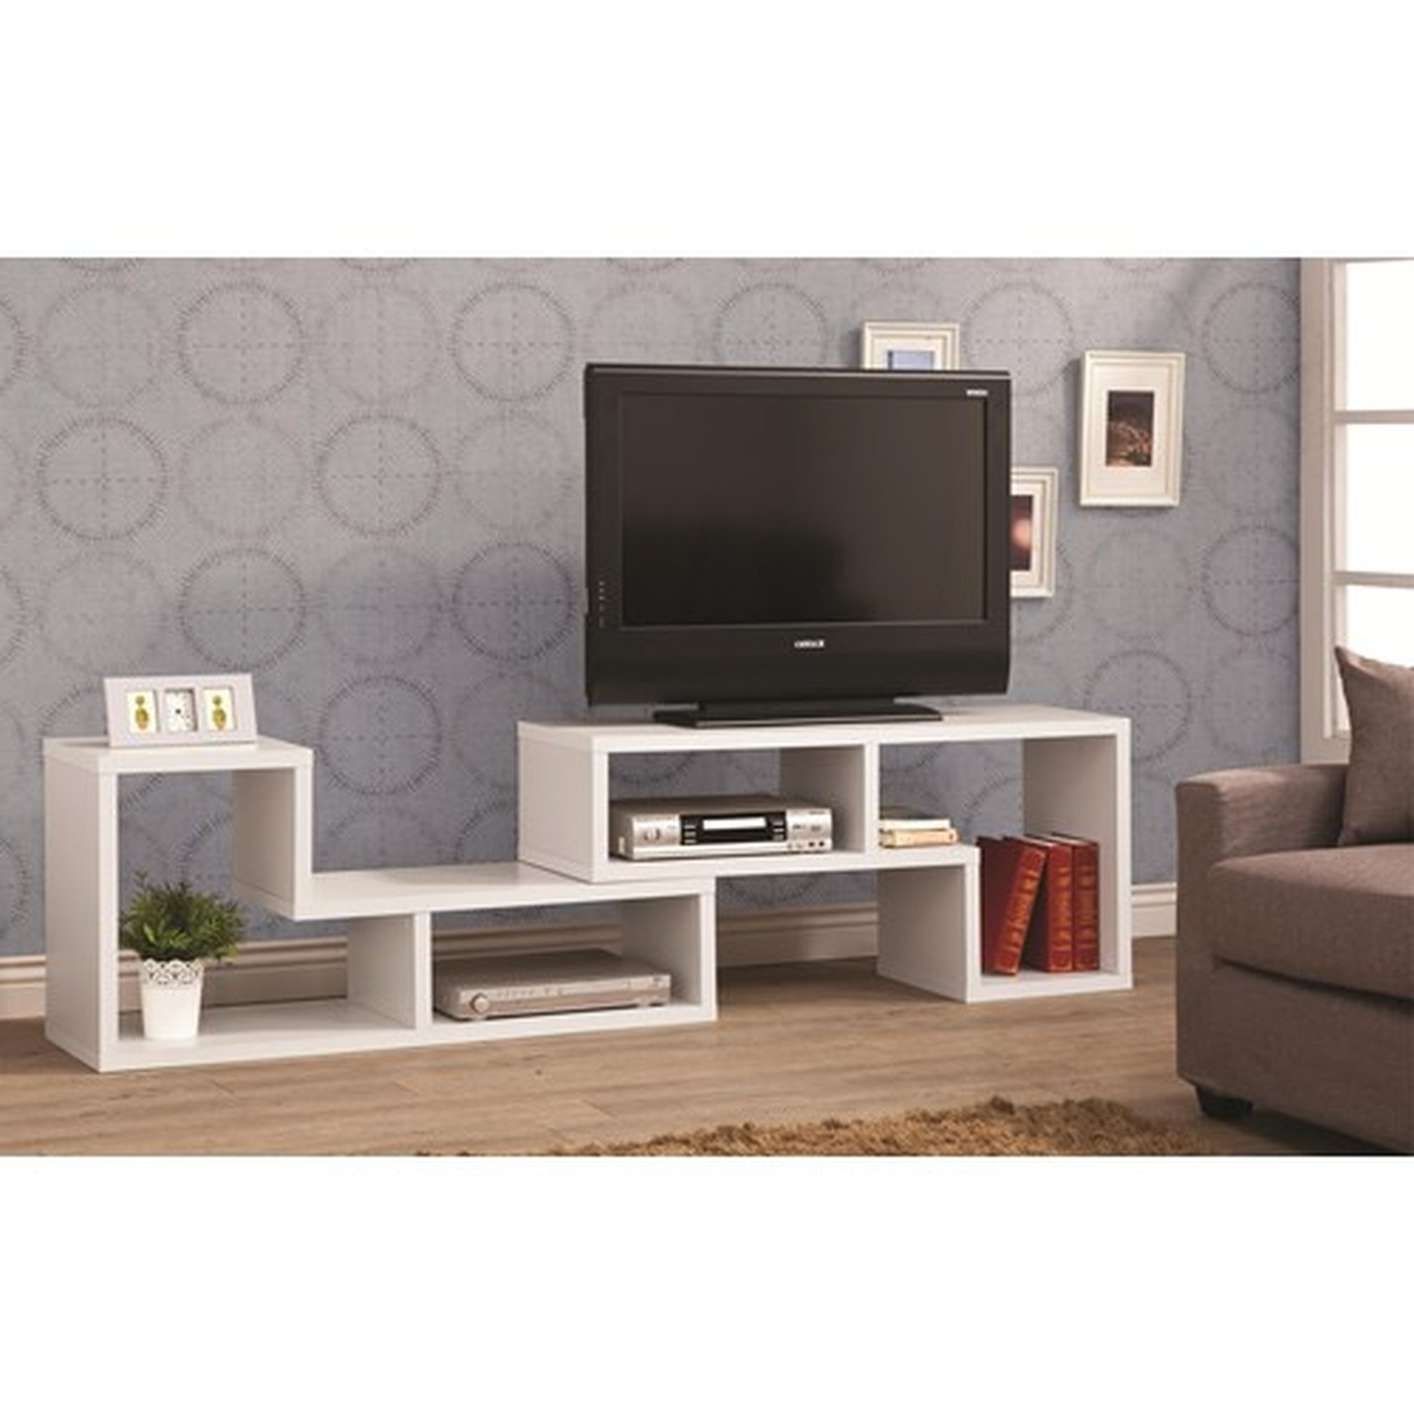 White Wood Tv Stand – Steal A Sofa Furniture Outlet Los Angeles Ca Intended For Wooden Tv Stands (View 7 of 15)